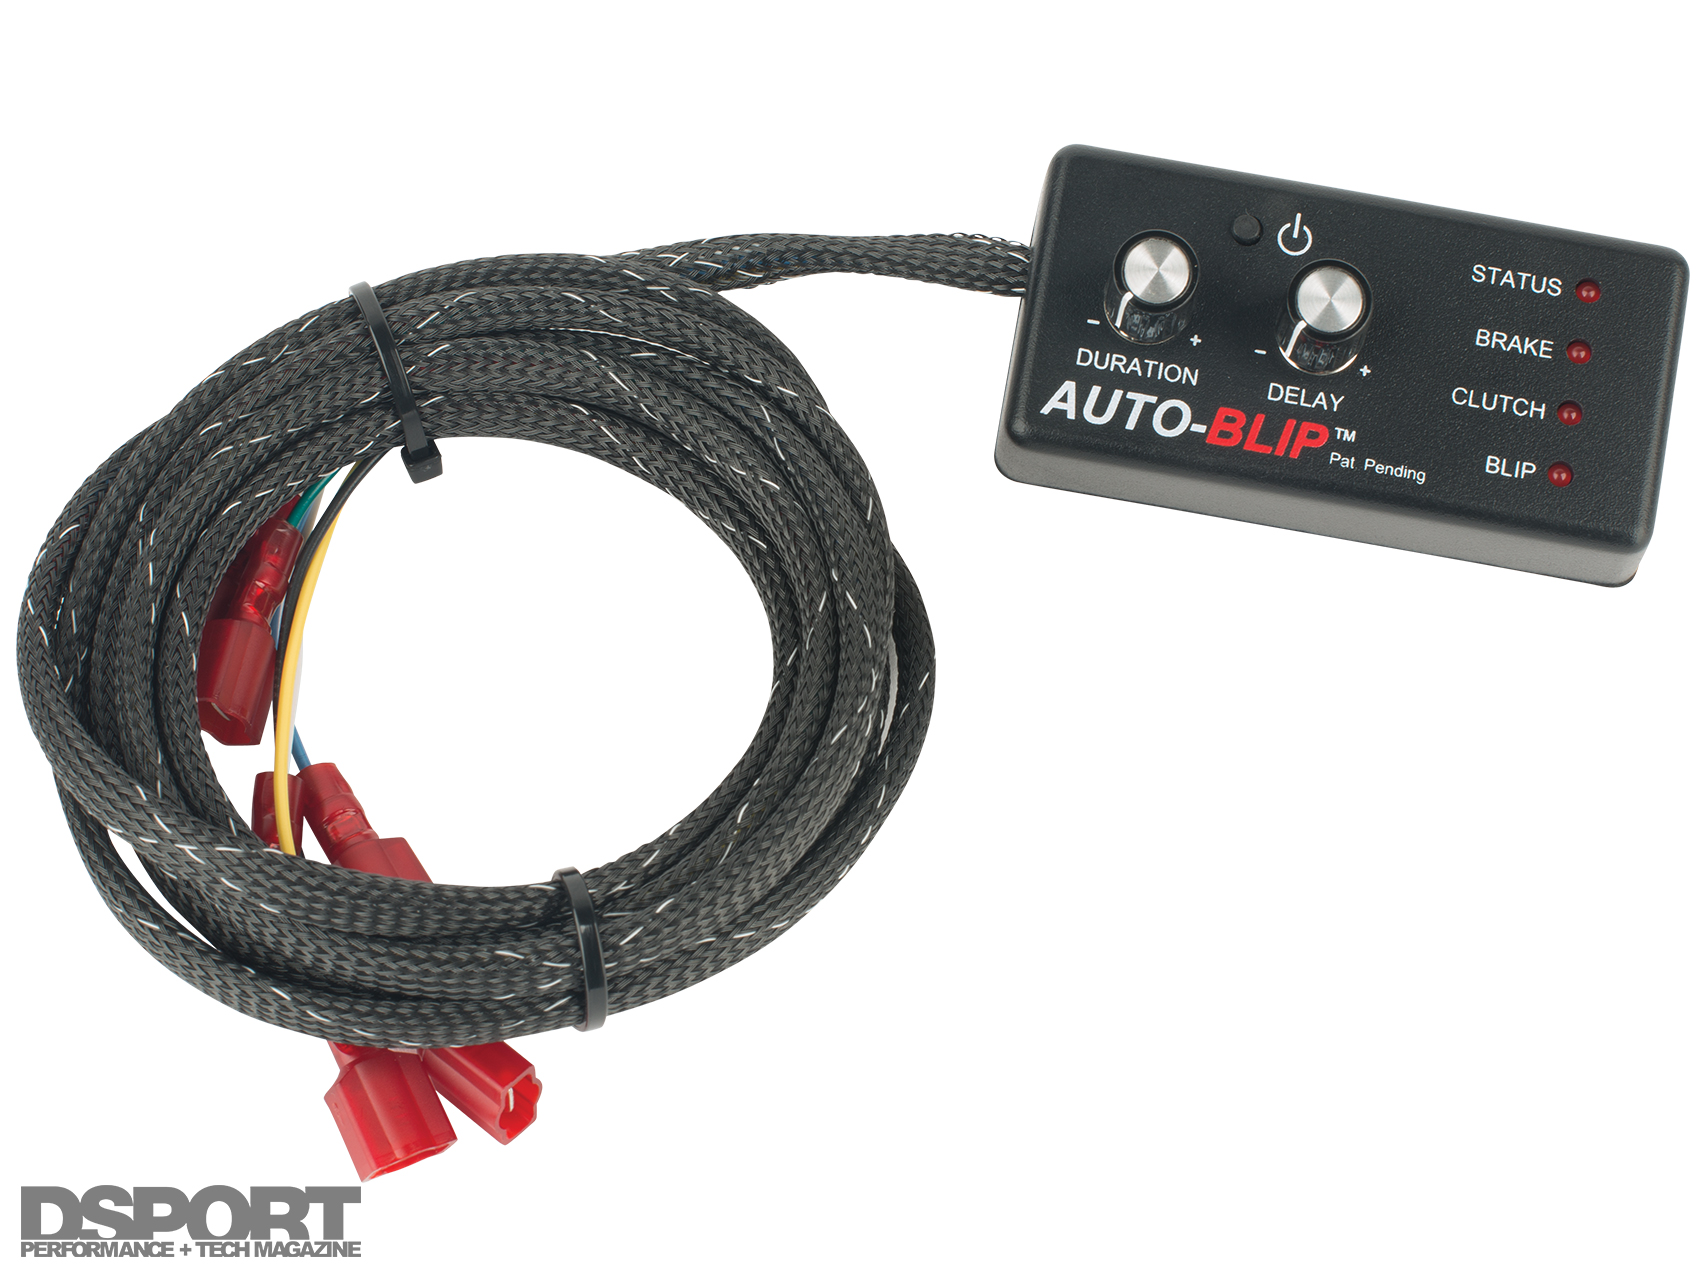 Quick Tech: AUTO-BLiP Intelligent Downshifts Removes the Need for  Heel-and-Toe Shifting - DSPORT Magazine